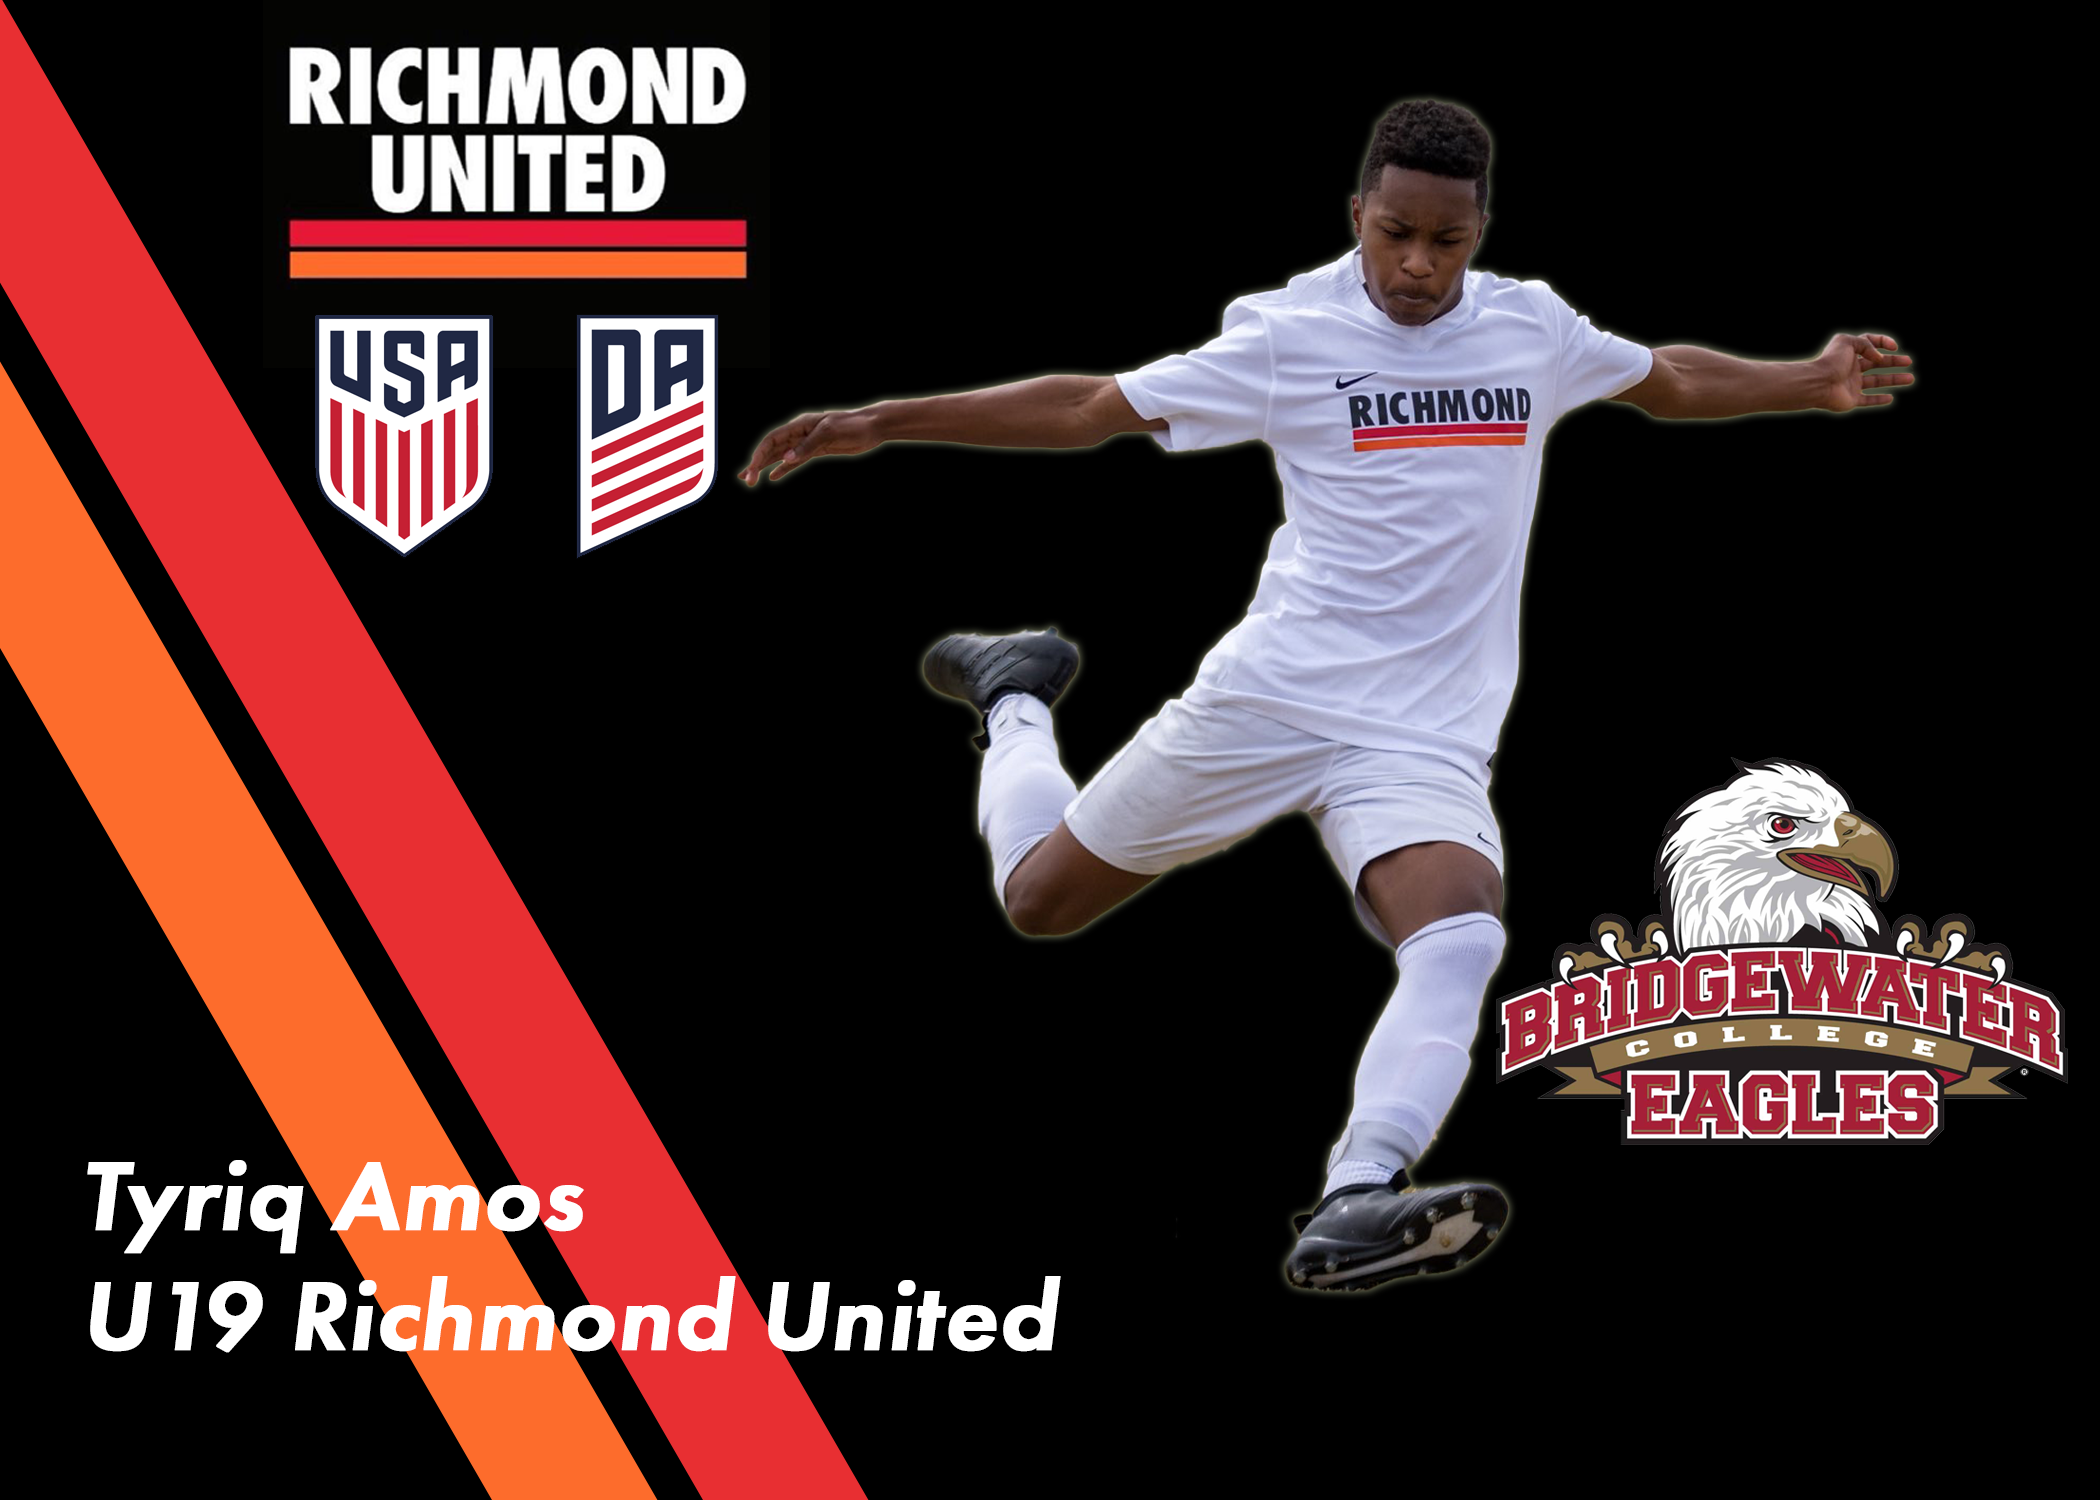 Tyriq Amos Commits to Bridgewater College for the Fall of 2020